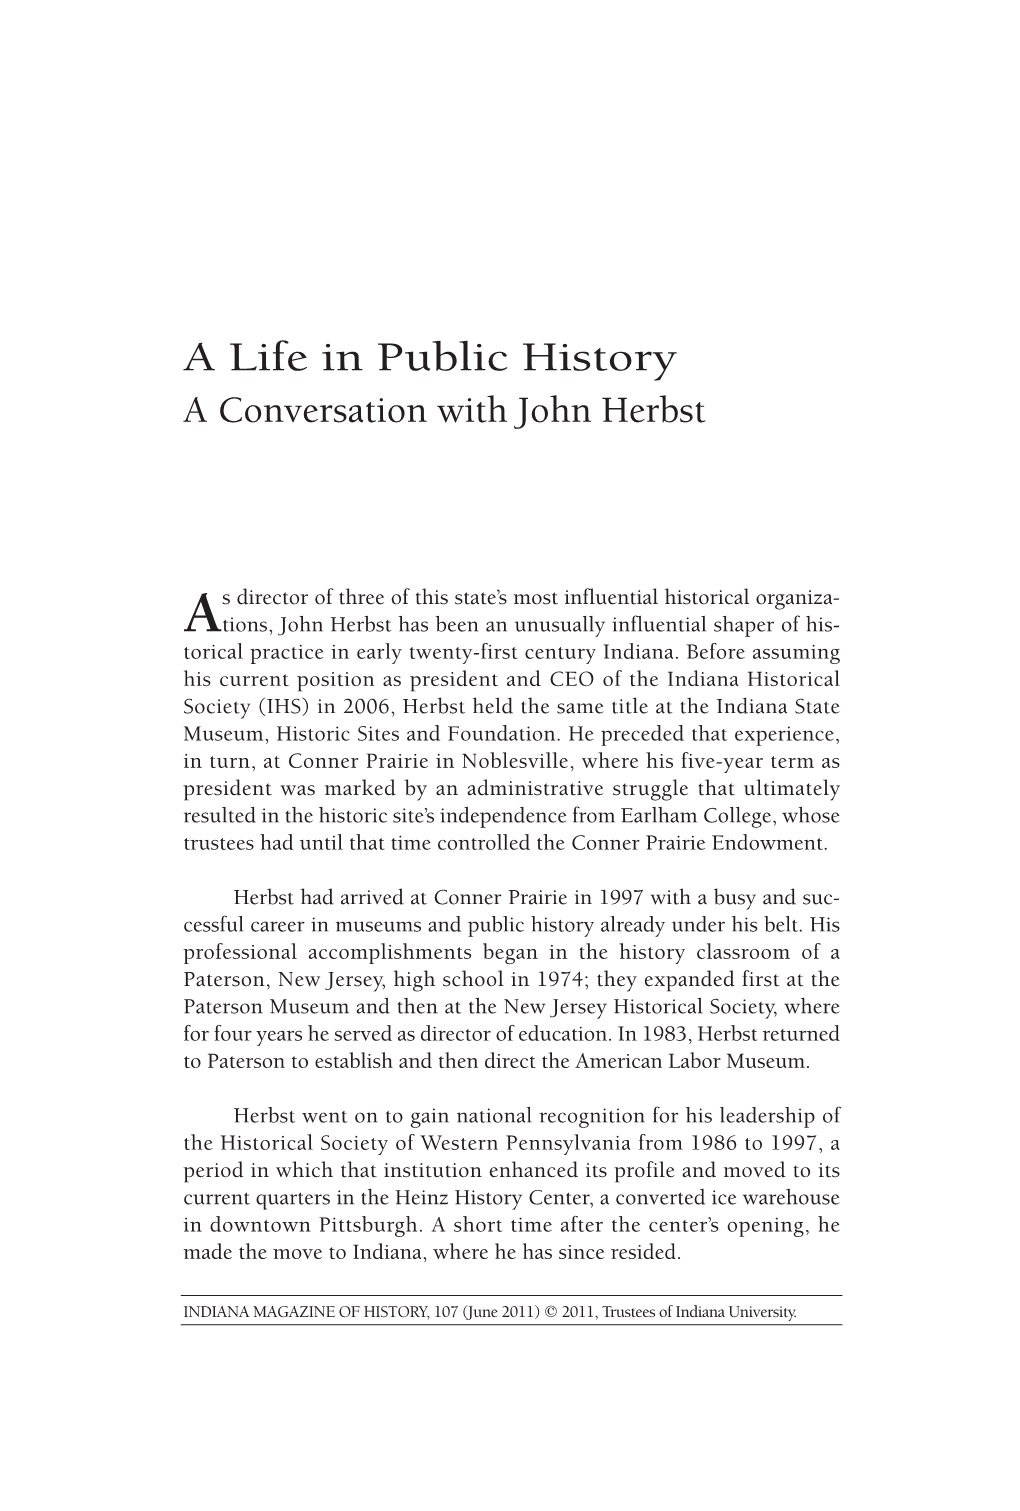 A Life in Public History a Conversation with John Herbst